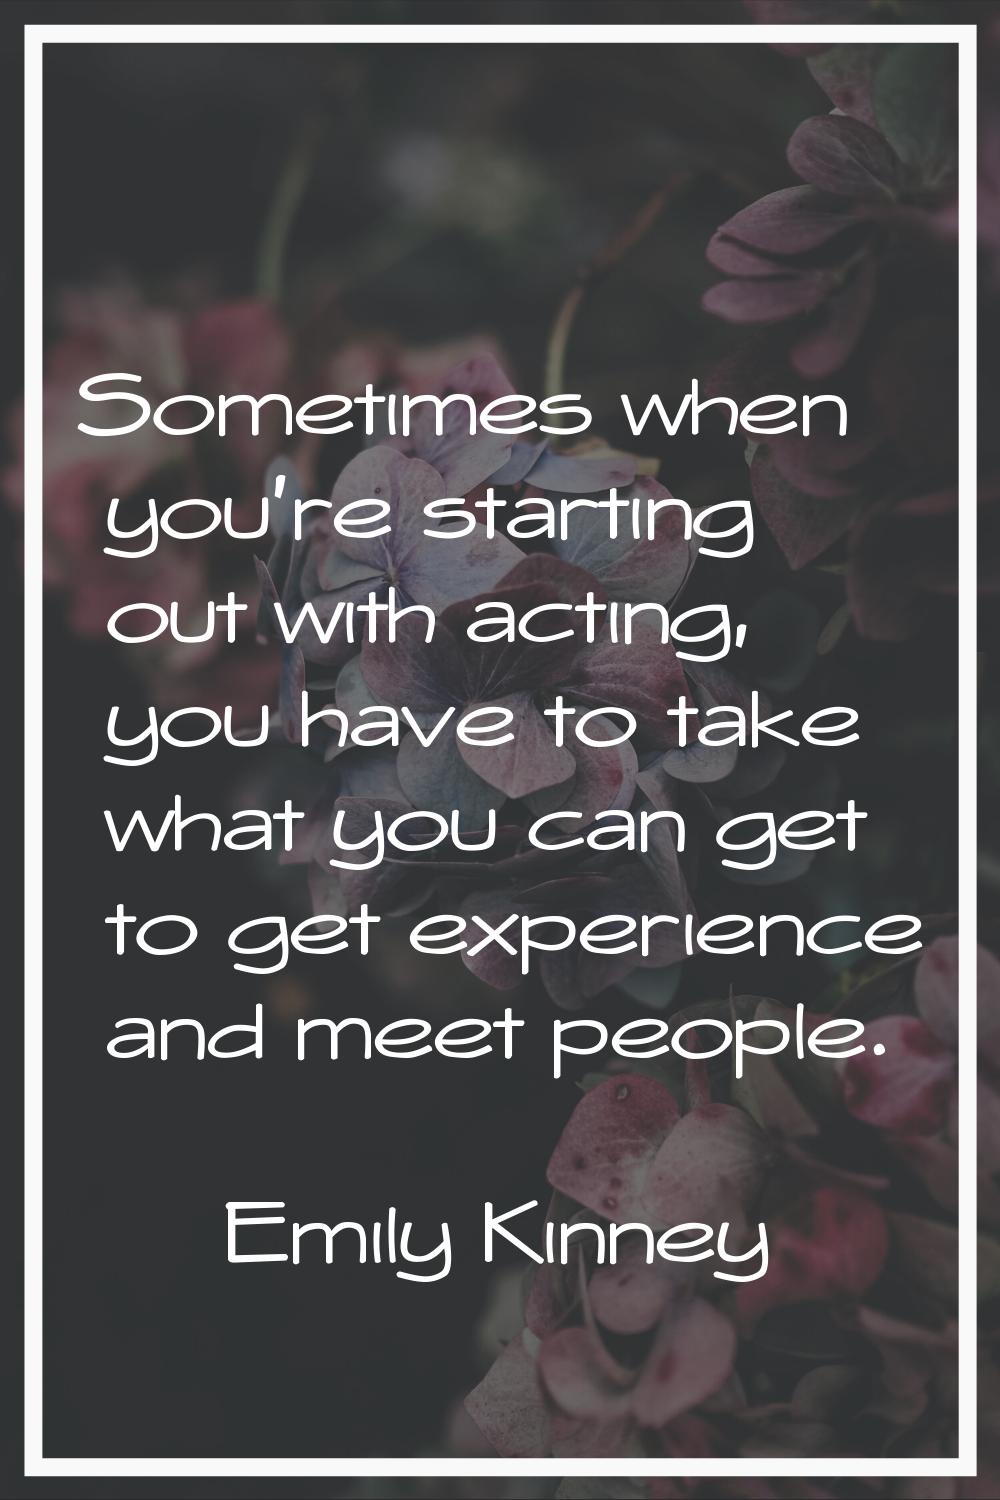 Sometimes when you're starting out with acting, you have to take what you can get to get experience